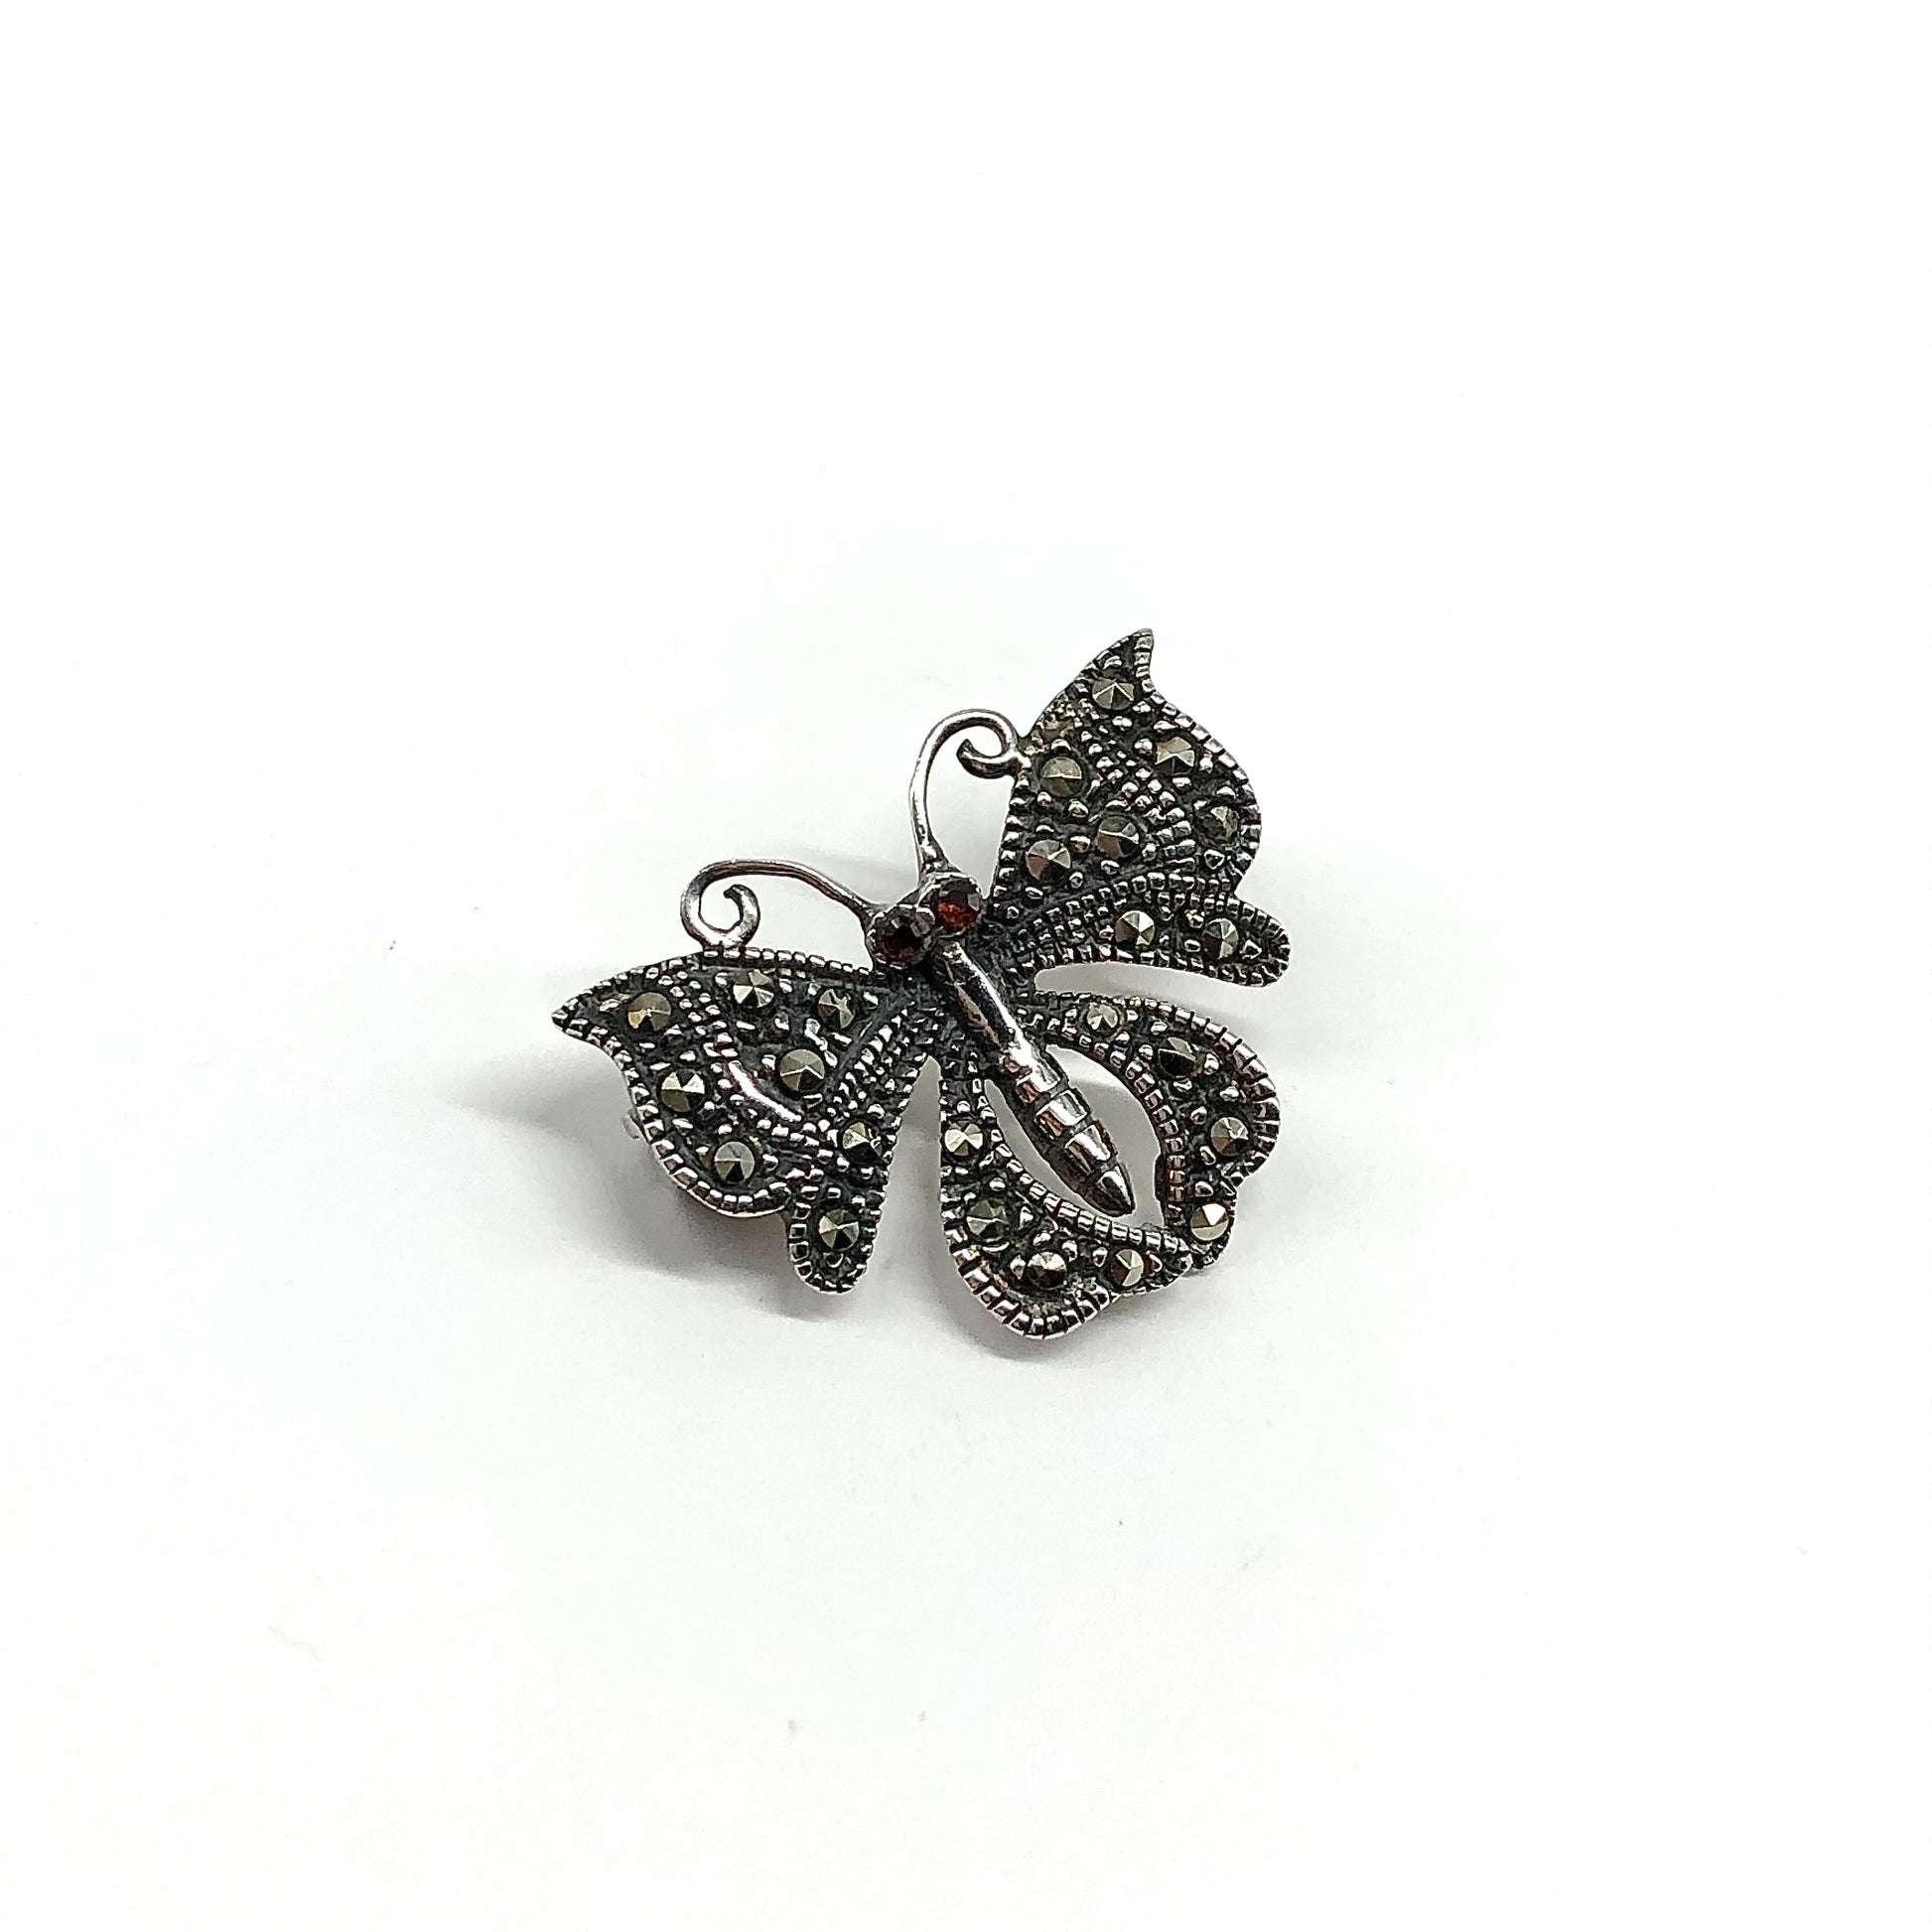 Brooch, Mens or Womens Sterling Silver Marcasite Stone Butterfly Brooch or Tie Pin